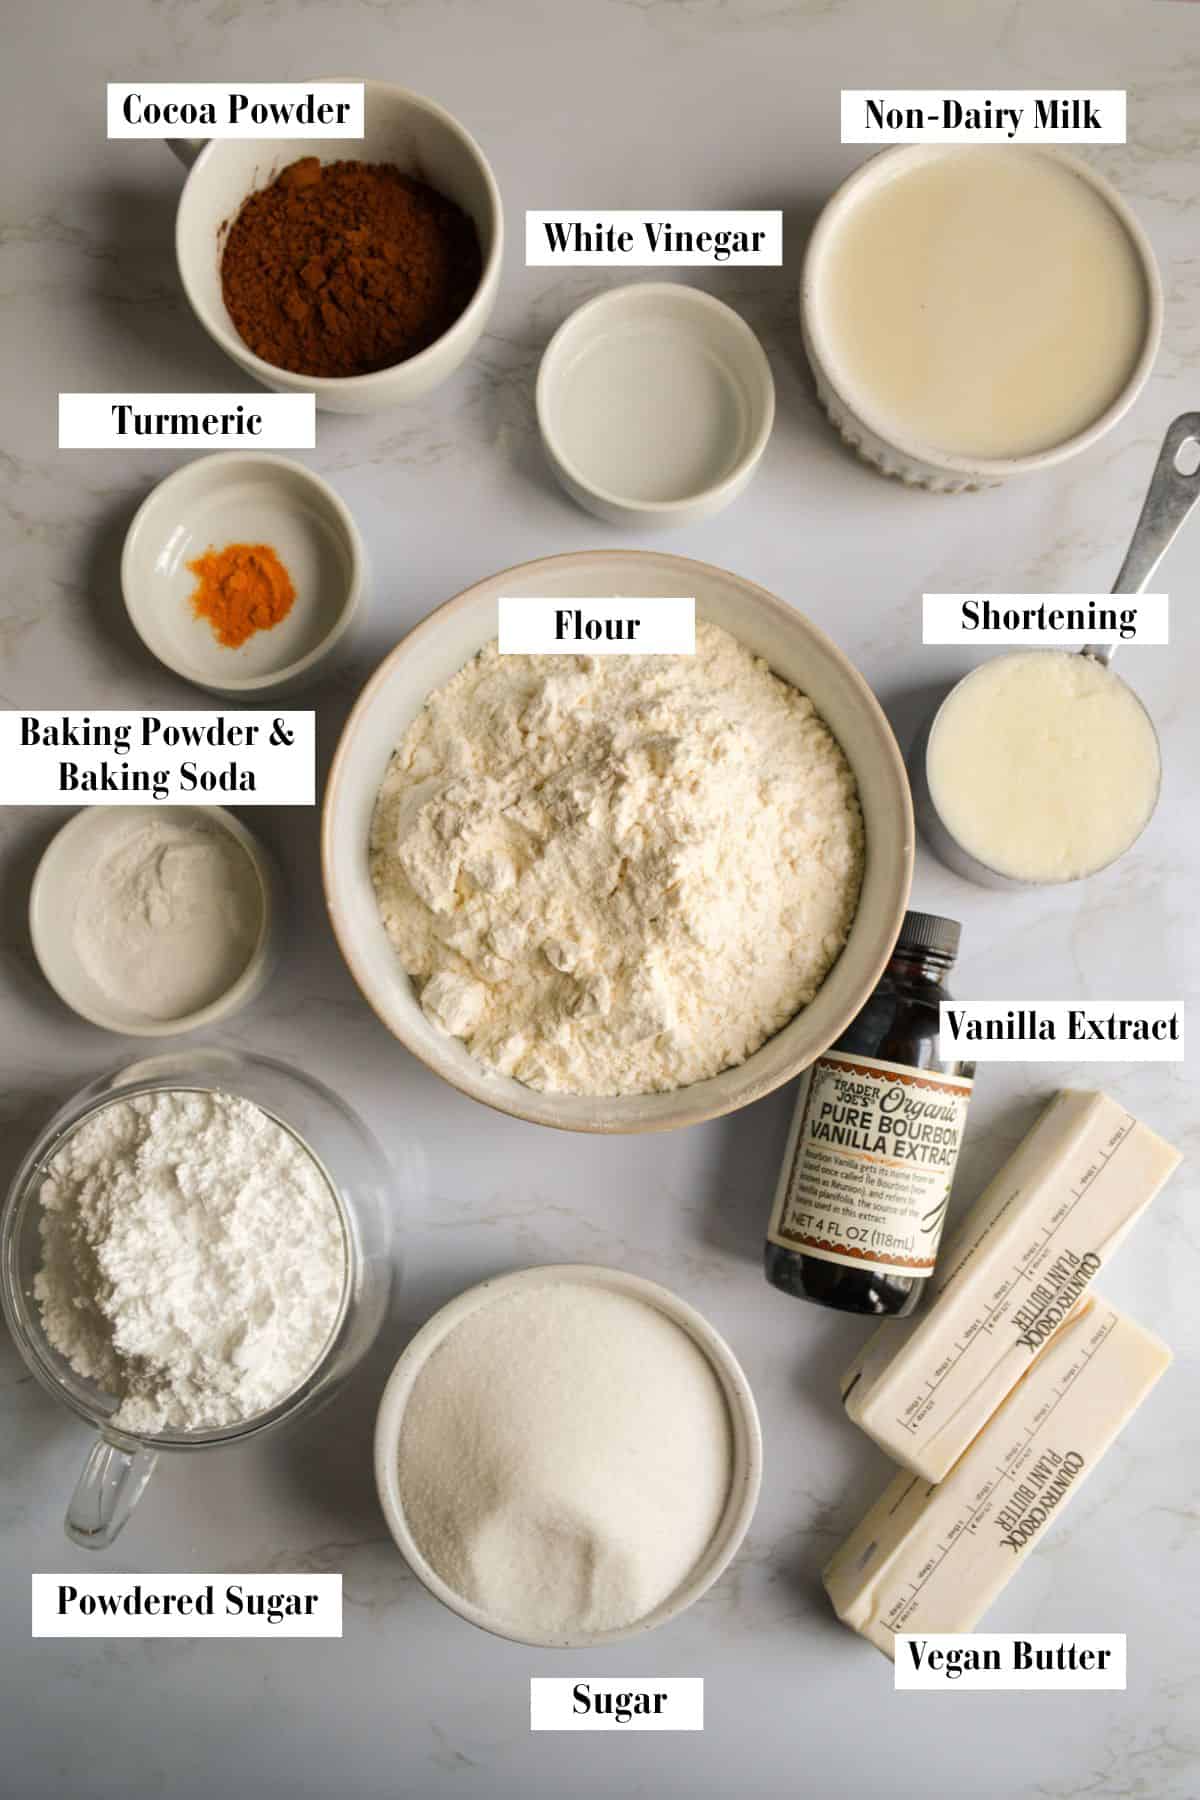 Ingredients needed to make this recipe in small bowls and cups on a marble surface.